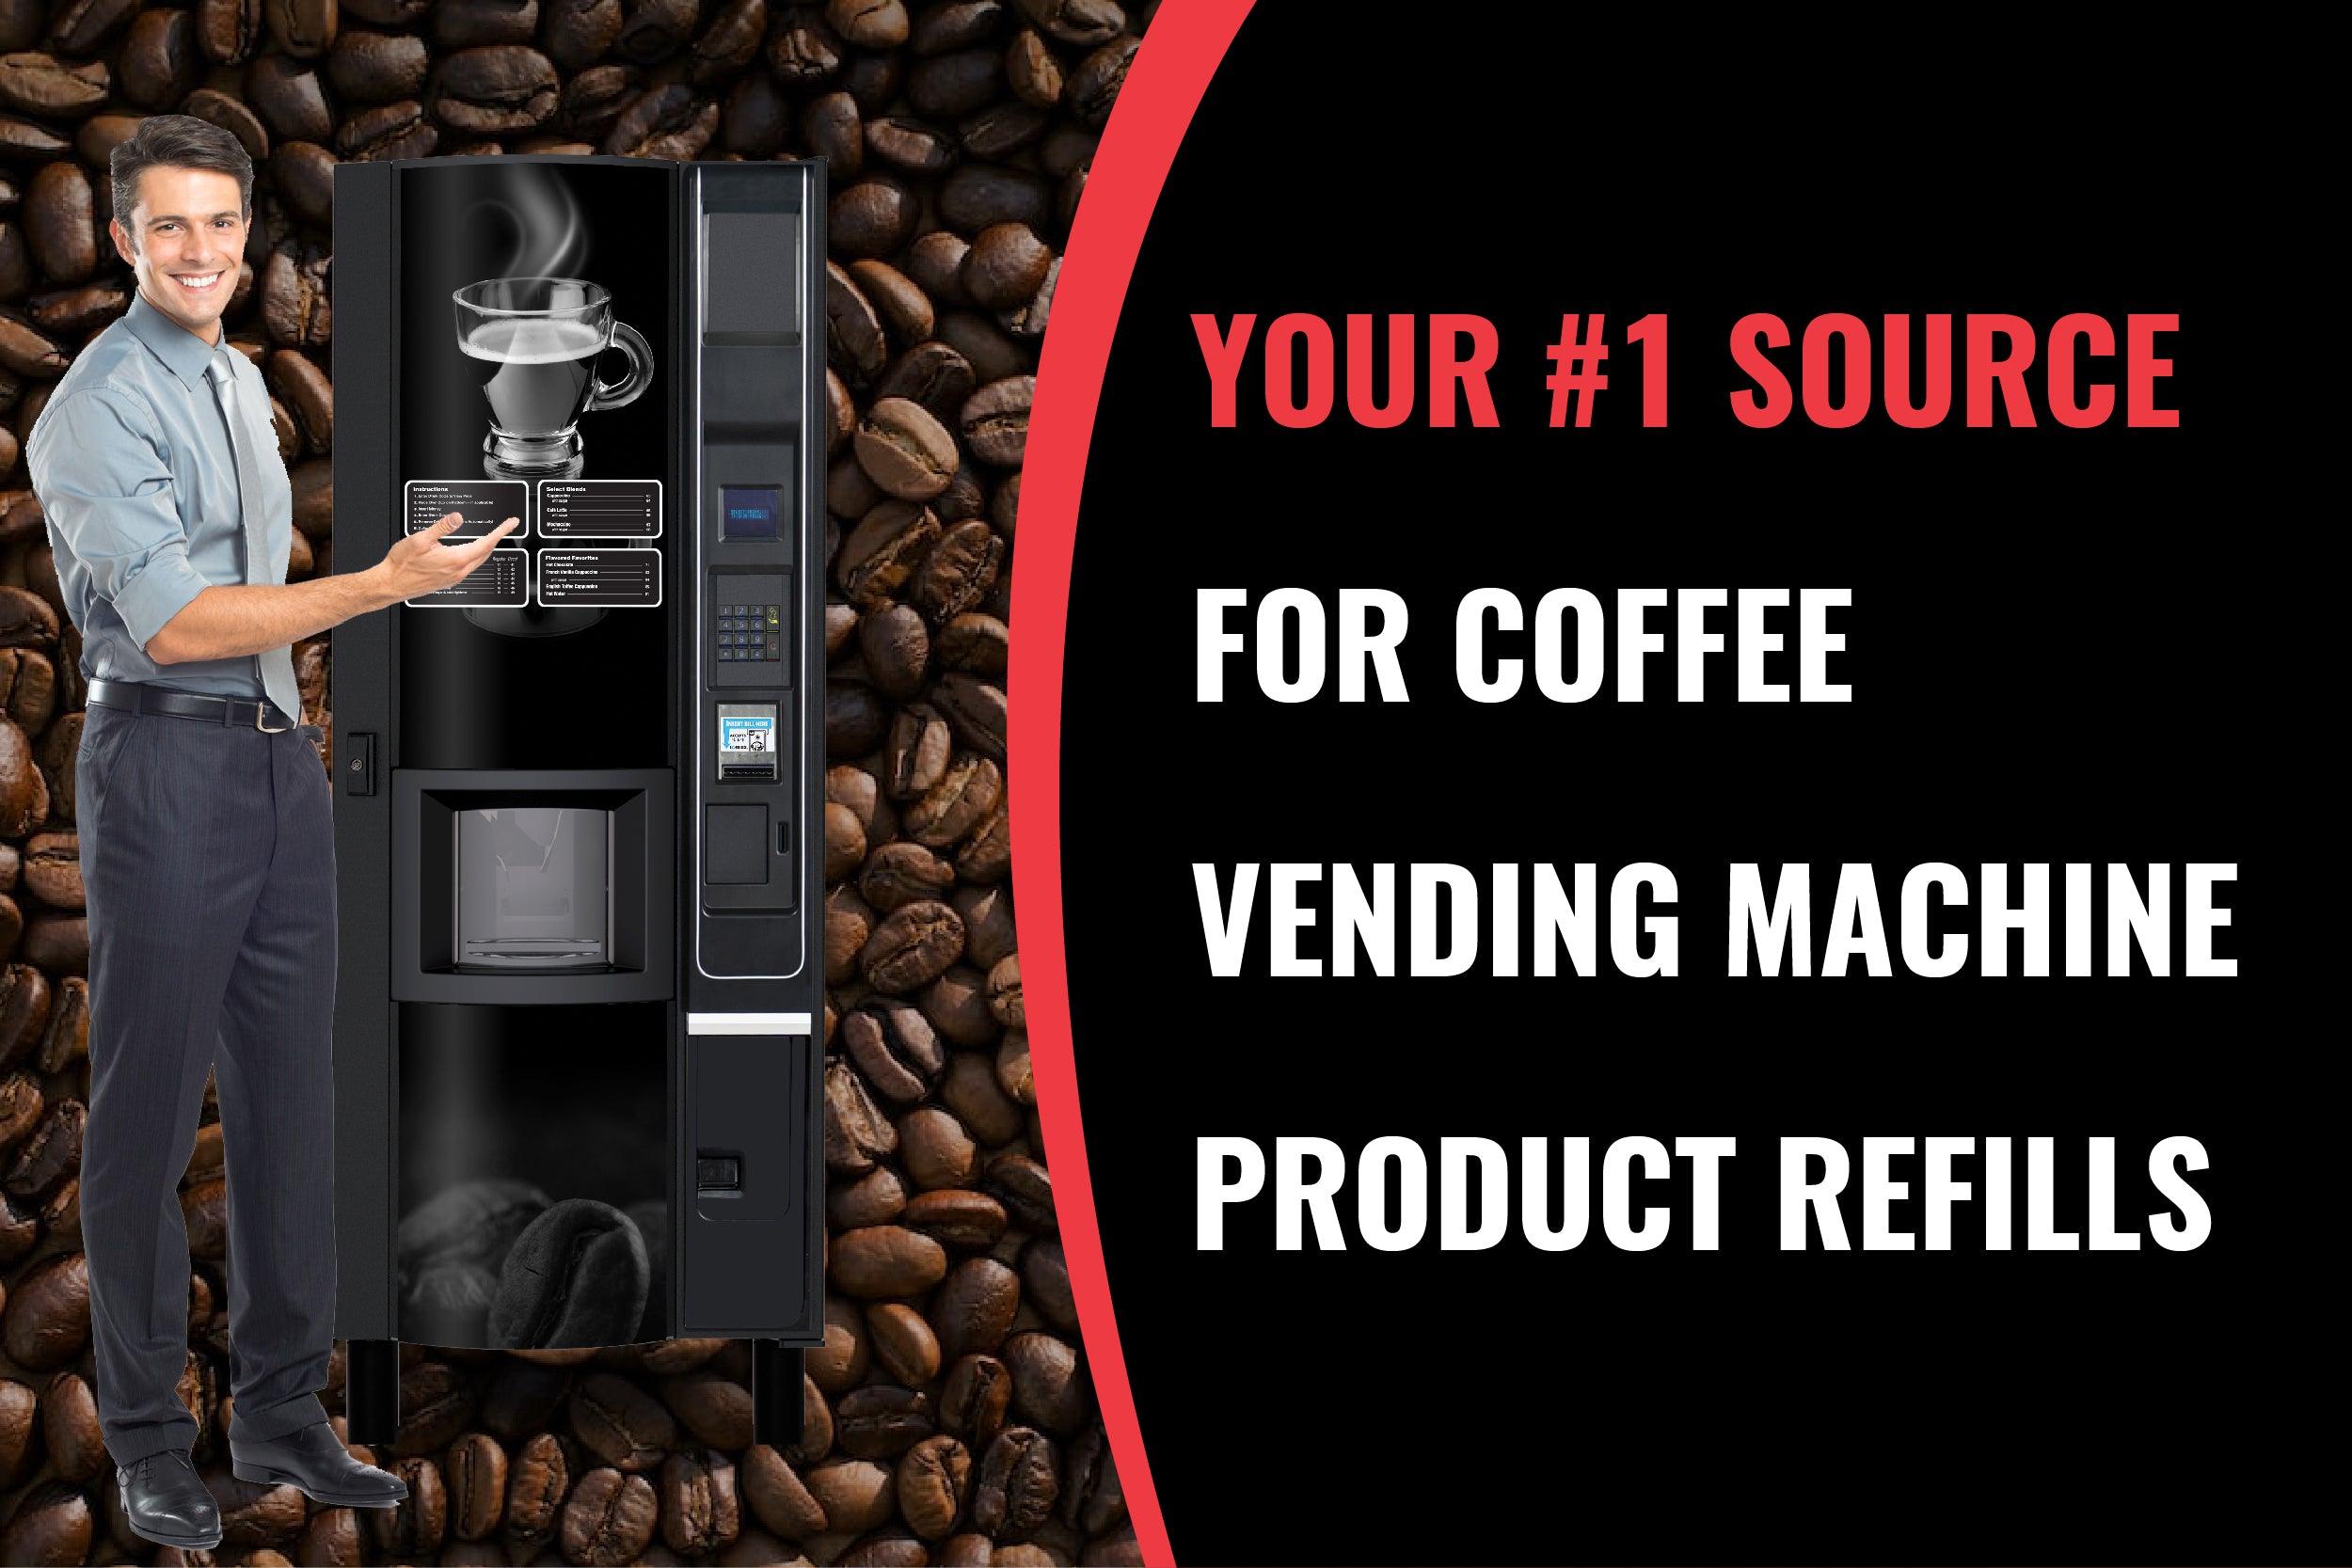 Vending Support: Vendnet - Your #1 Source for Coffee Vending Machine Product Refills - Vendnet